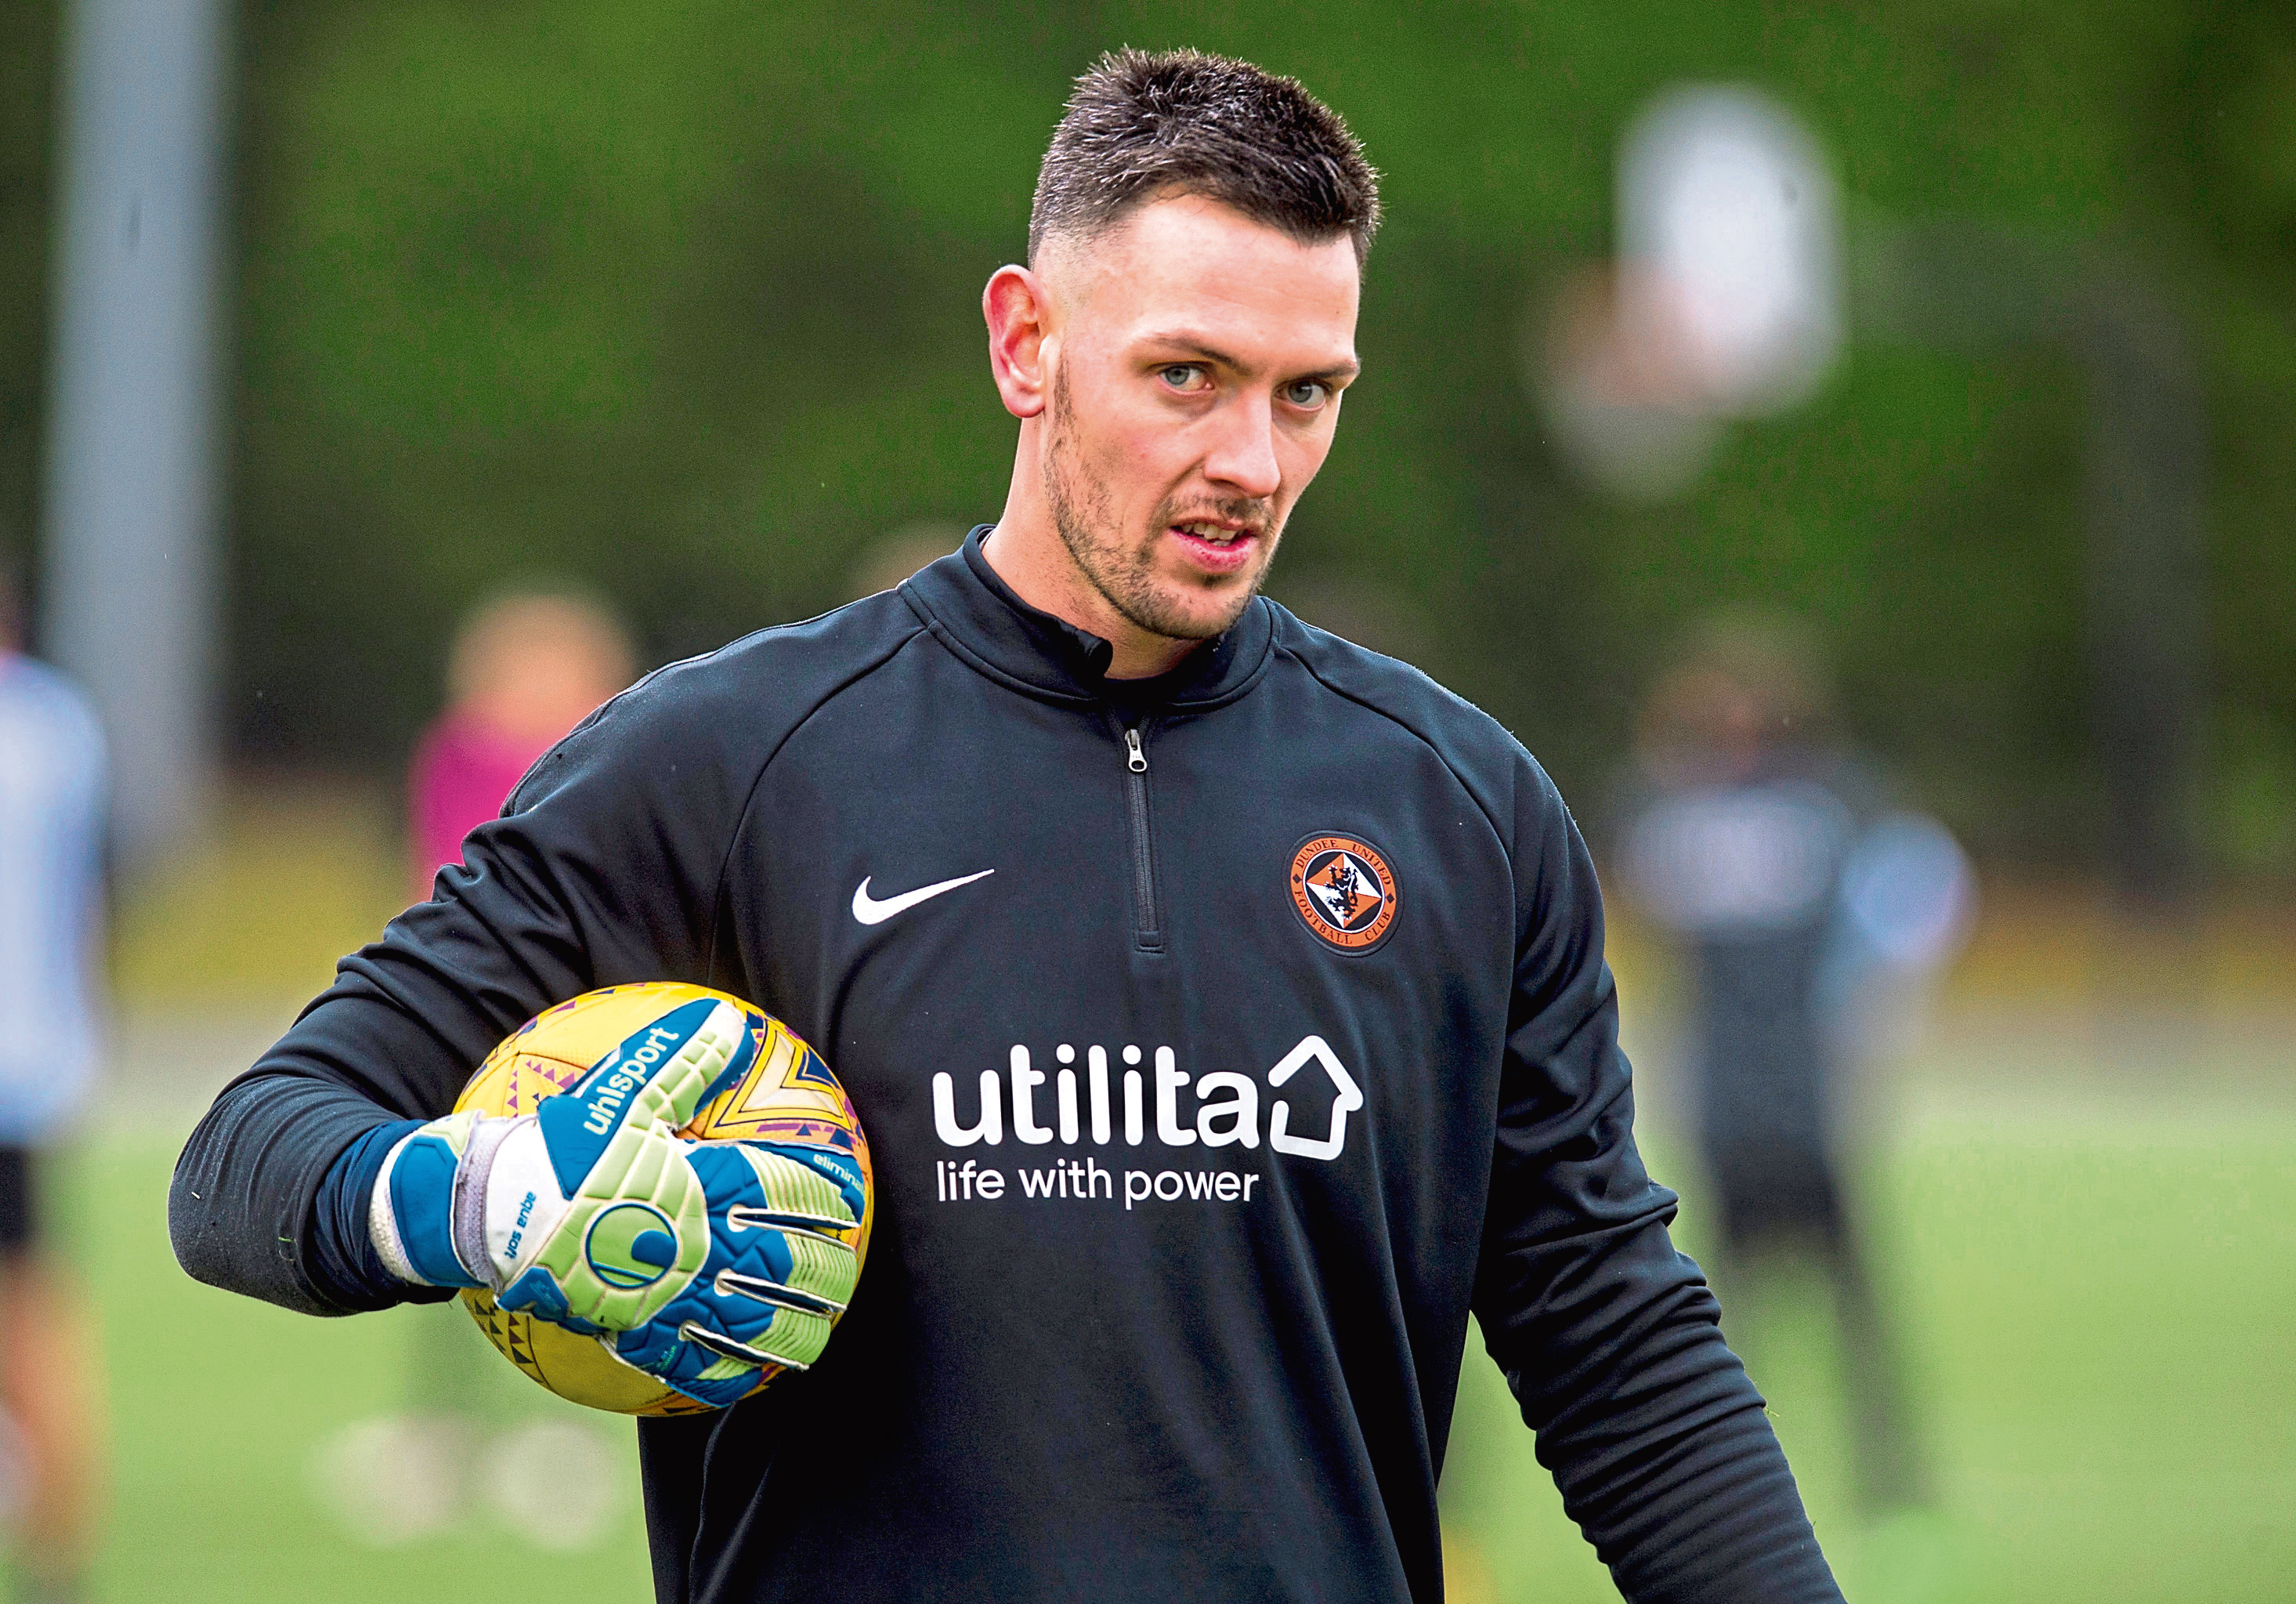 29/01/19
DUNDEE UNITED TRAINING
ST ANDREWS
New Dundee United loan signing Ross Laidlaw